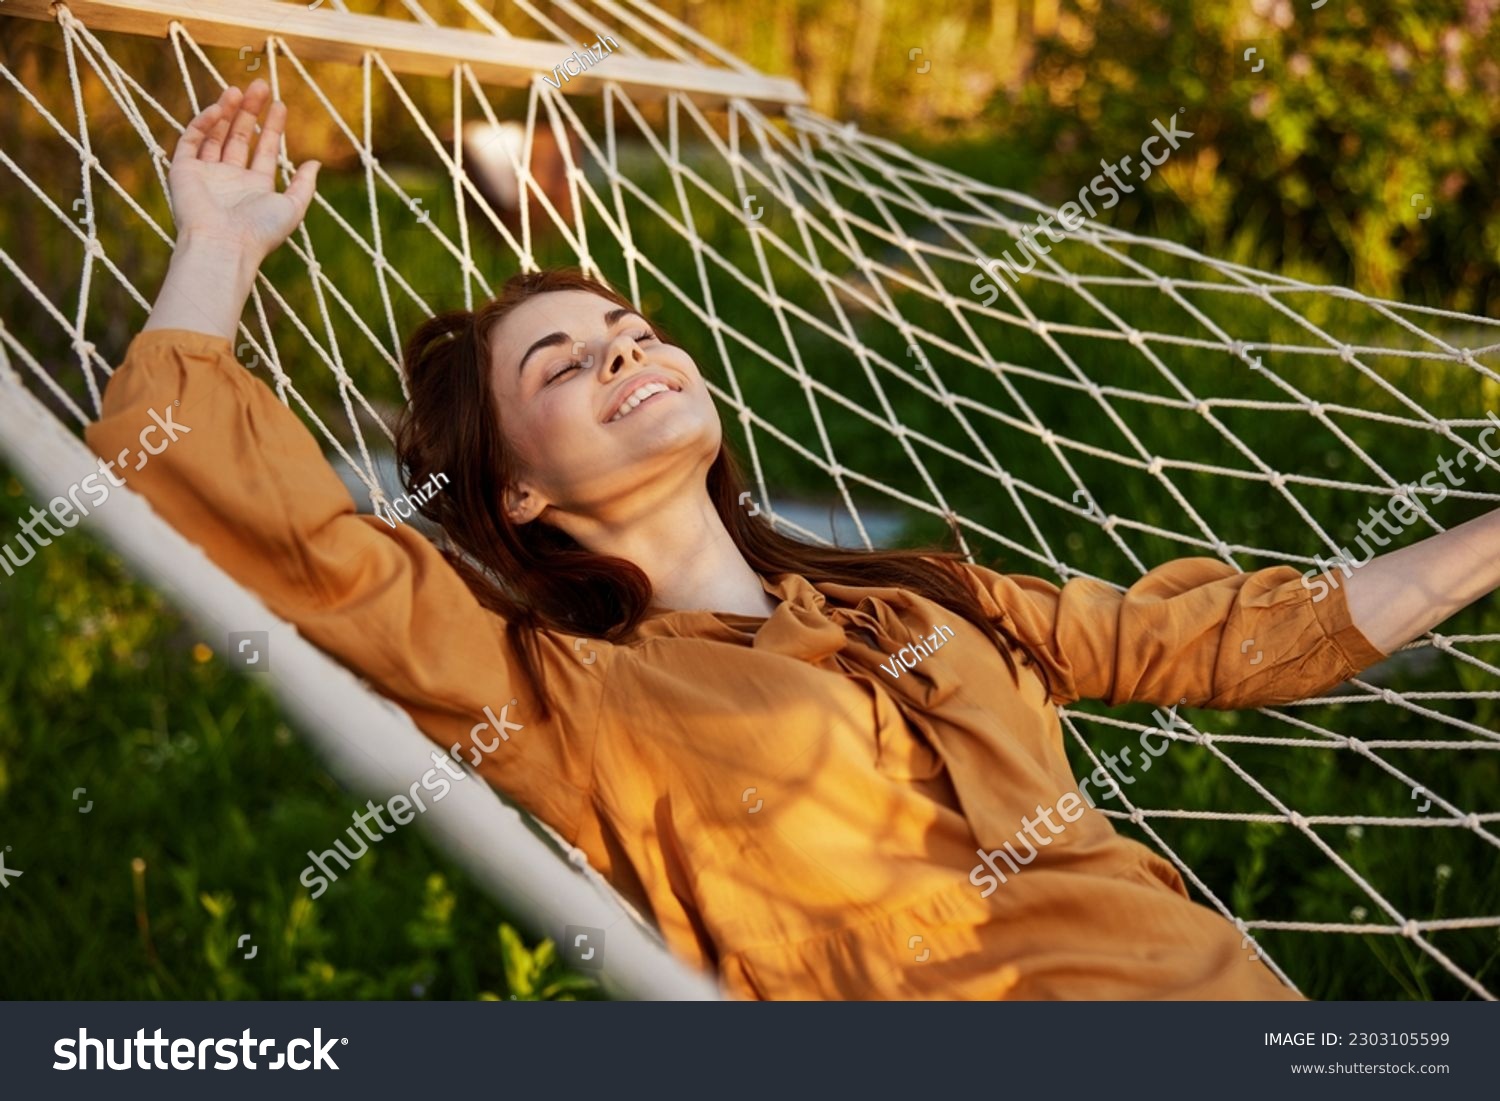 a happy woman is resting in a hammock with her eyes closed and her hands behind her head smiling happily enjoying the day #2303105599